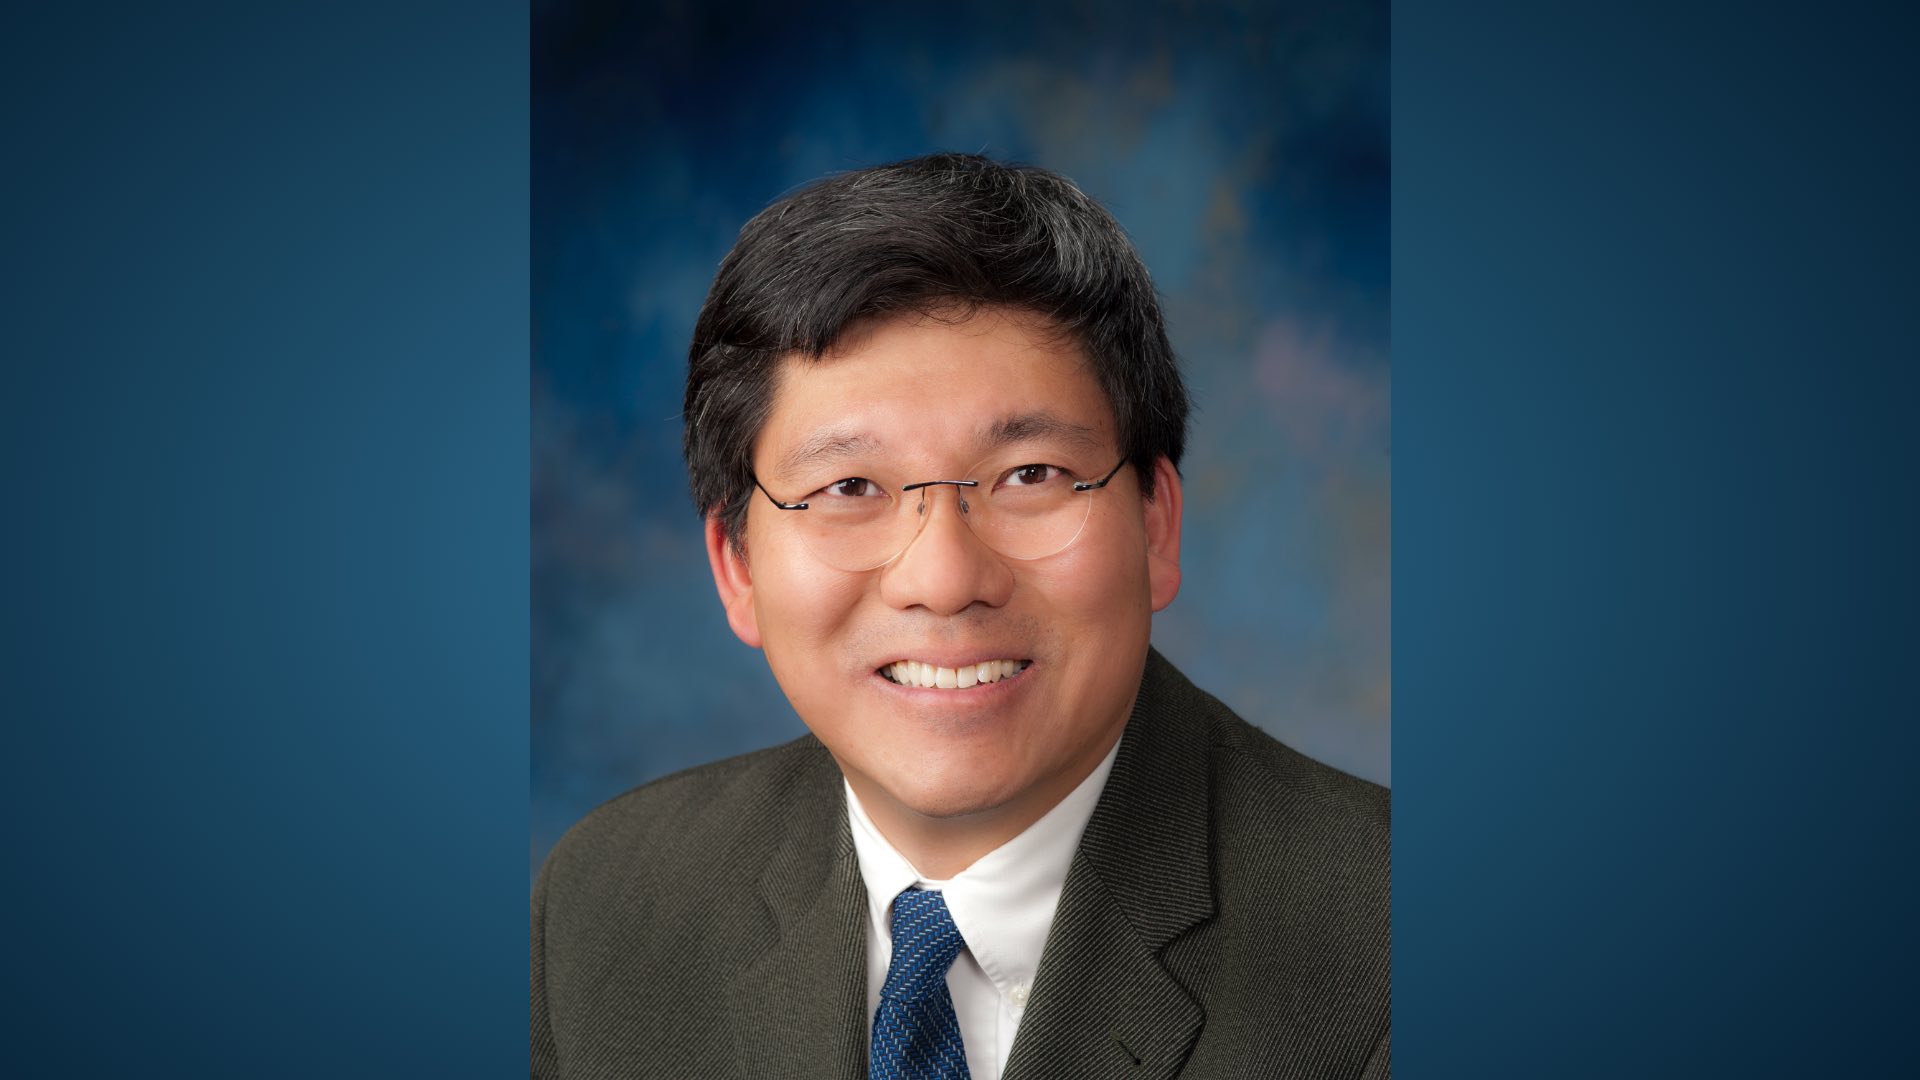 Edward Chu, M.D., Cancer Center Director, Speaks with the Editor and Publisher of The Cancer Letter